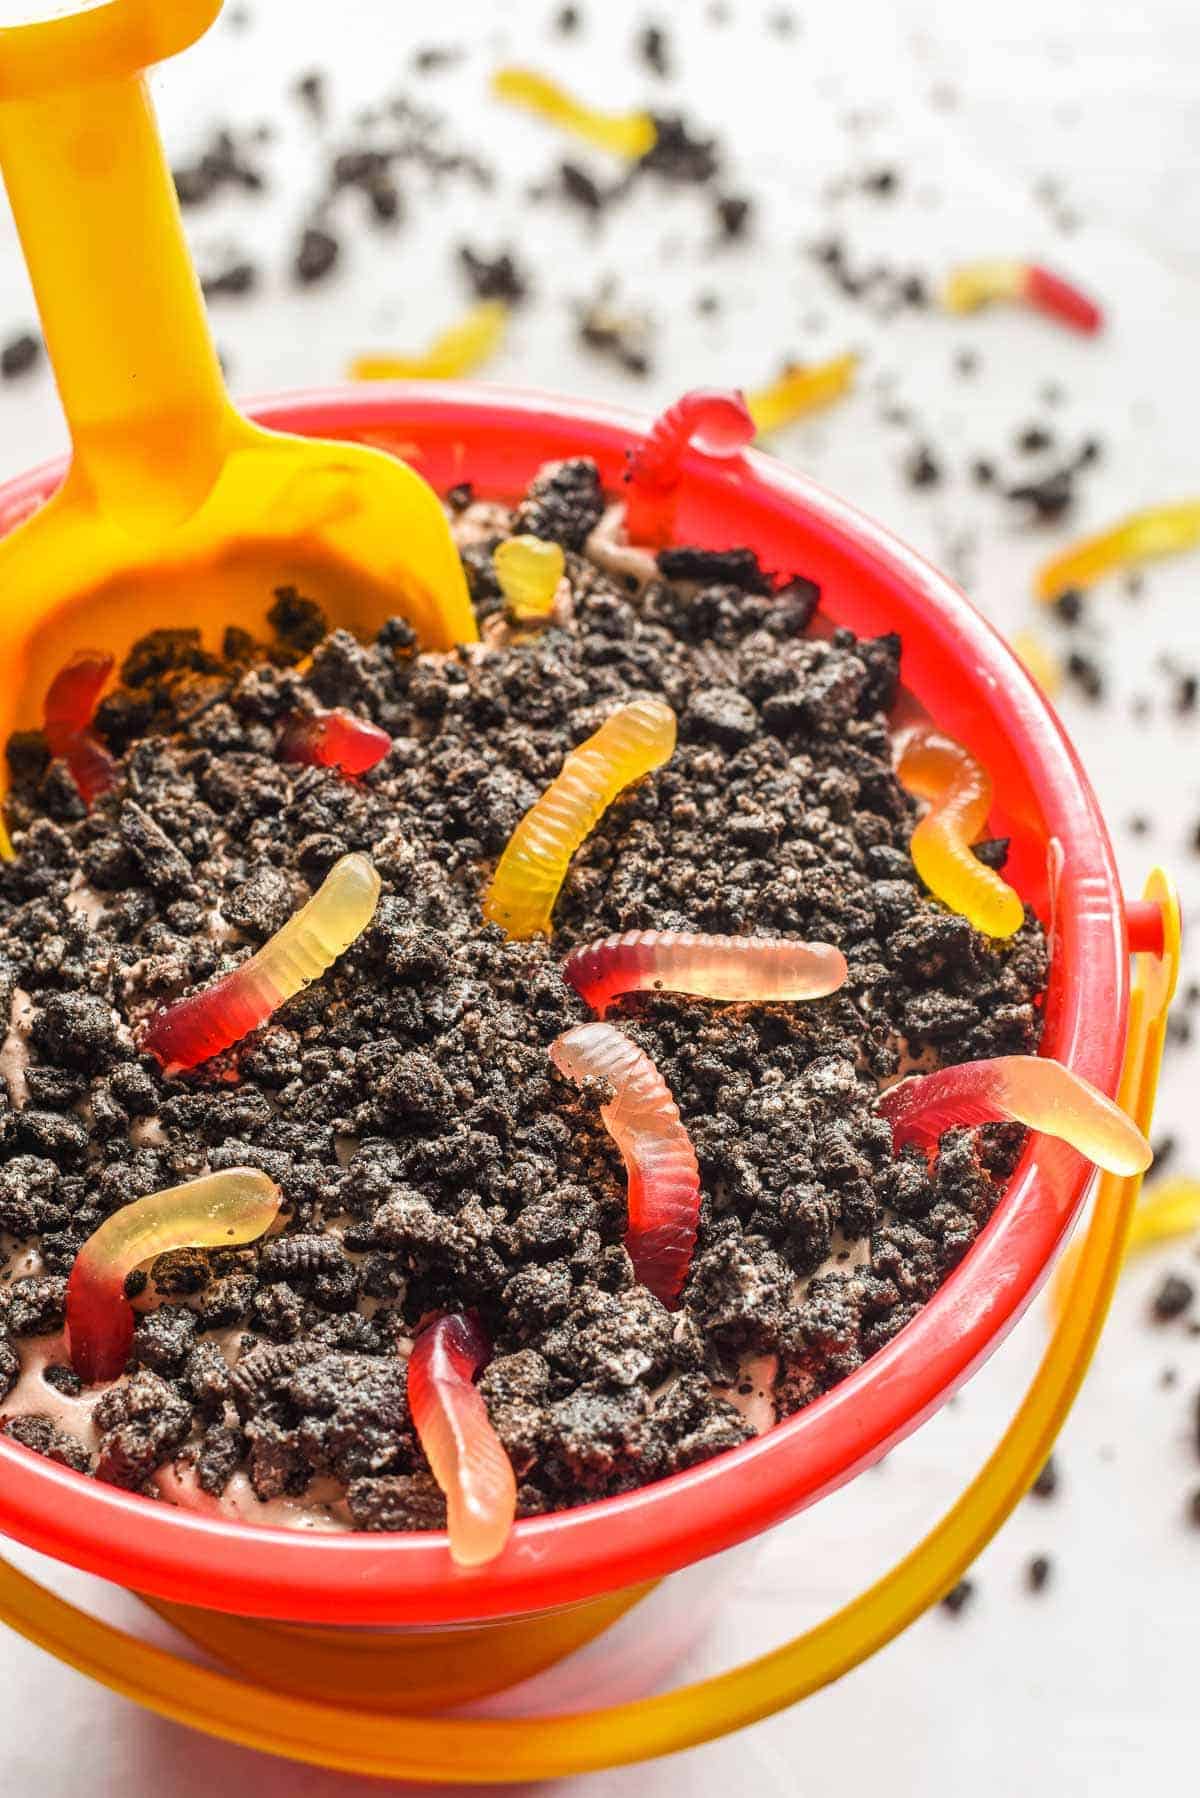 Dirt and Worms an Earth Day dessert! Required ingredients are the mud  (chocolate pudding), topsoil (crushed Oreos), and worms (gummy worms).  Additional ingredients for flair are chocolate rocks and fresh mint leaves.  